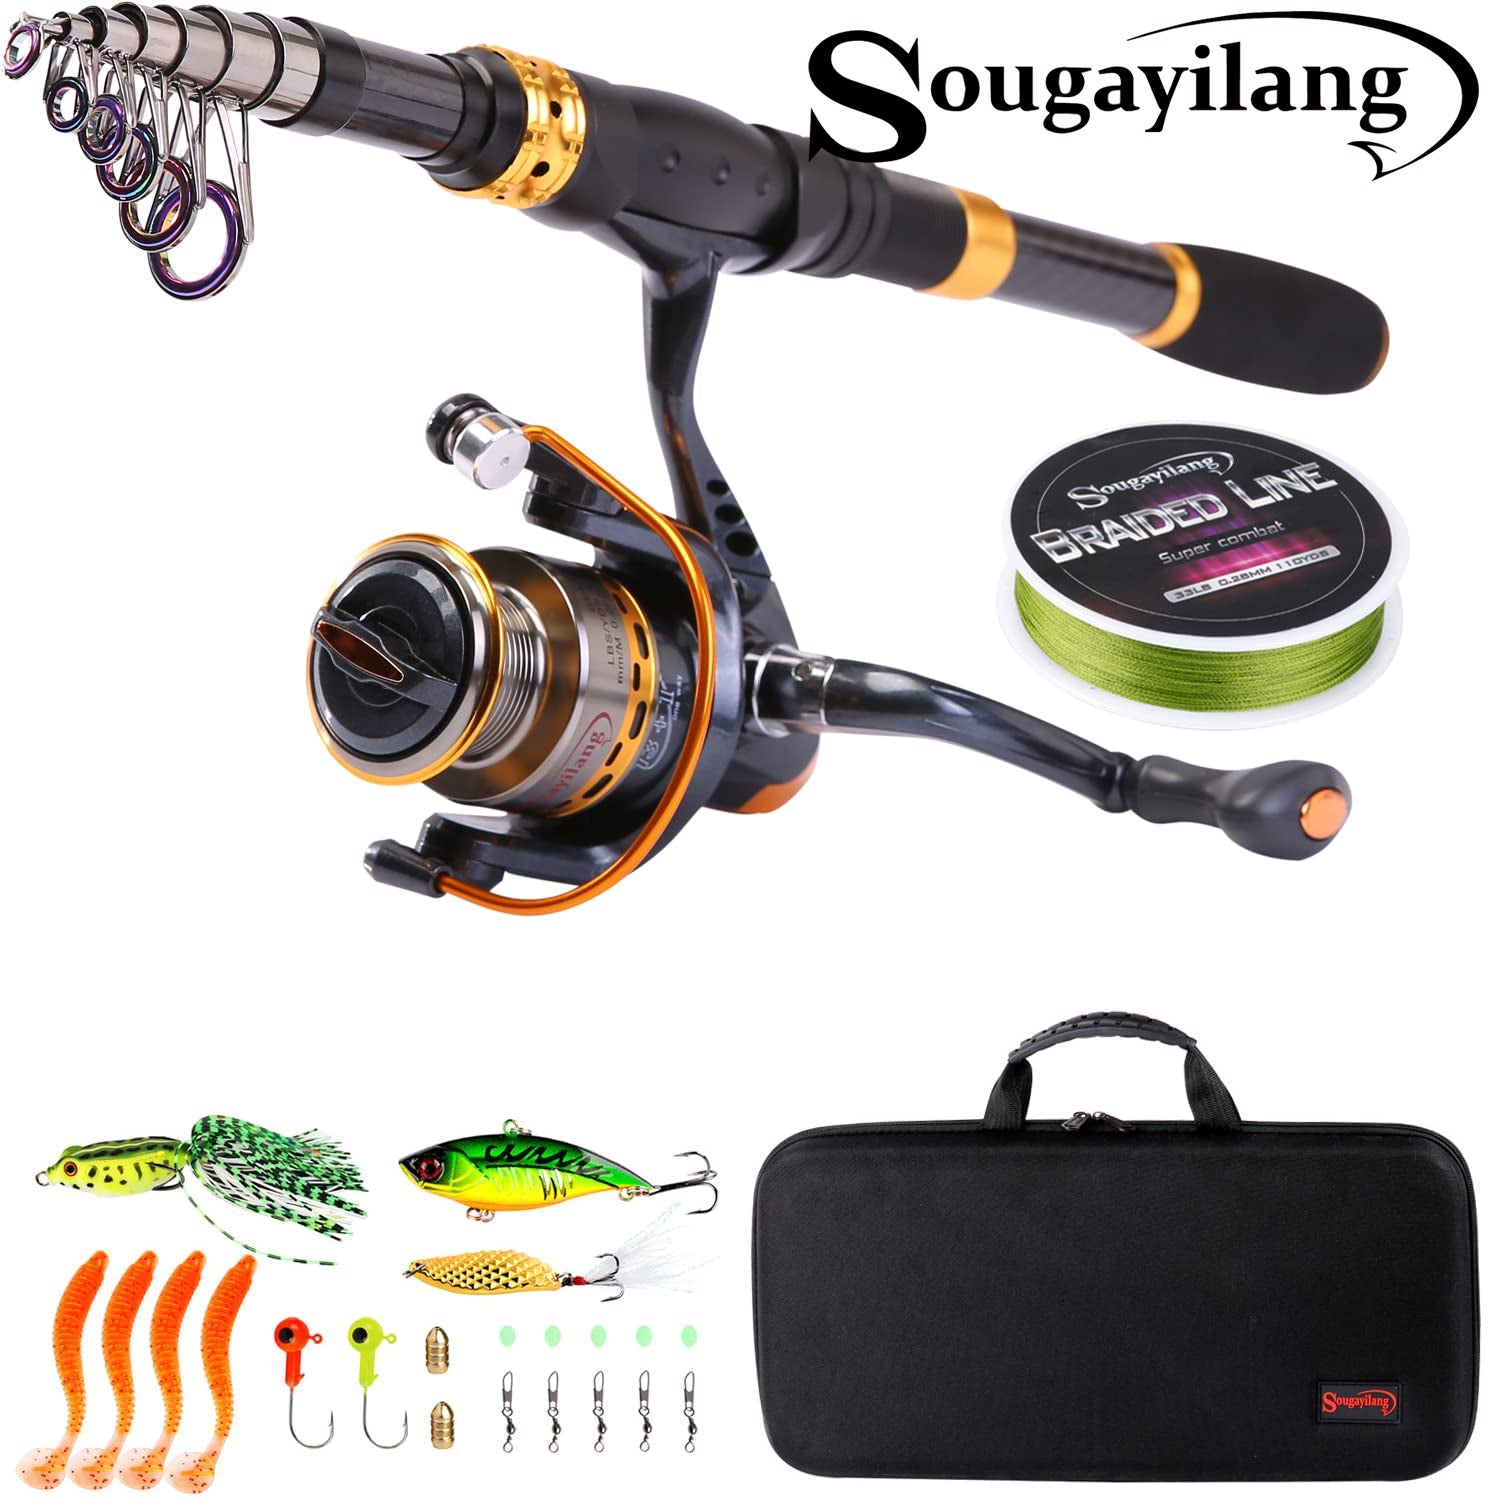 Dropship Sougayilang Travel Telescopic Fishing Rod Glass Fiber Fishing Pole  to Sell Online at a Lower Price